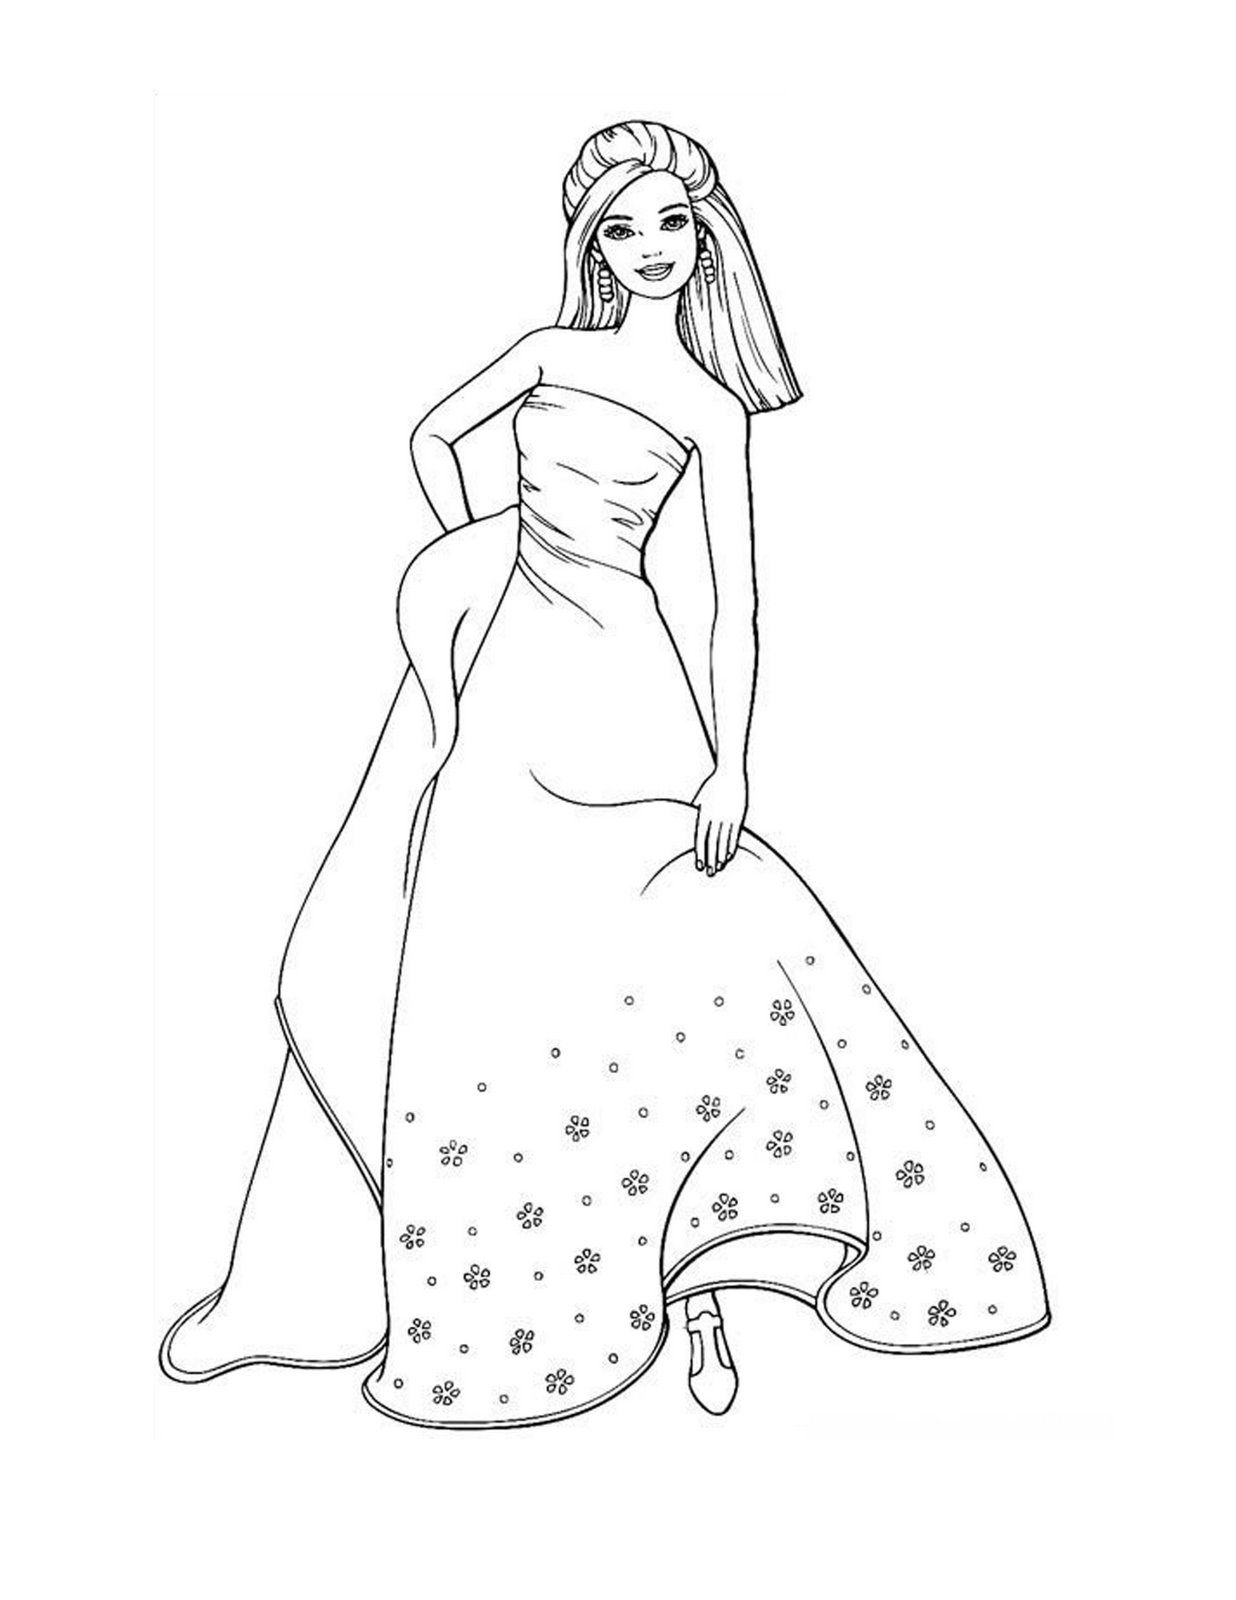 Model style barbie coloring pages >> Disney Coloring Pages